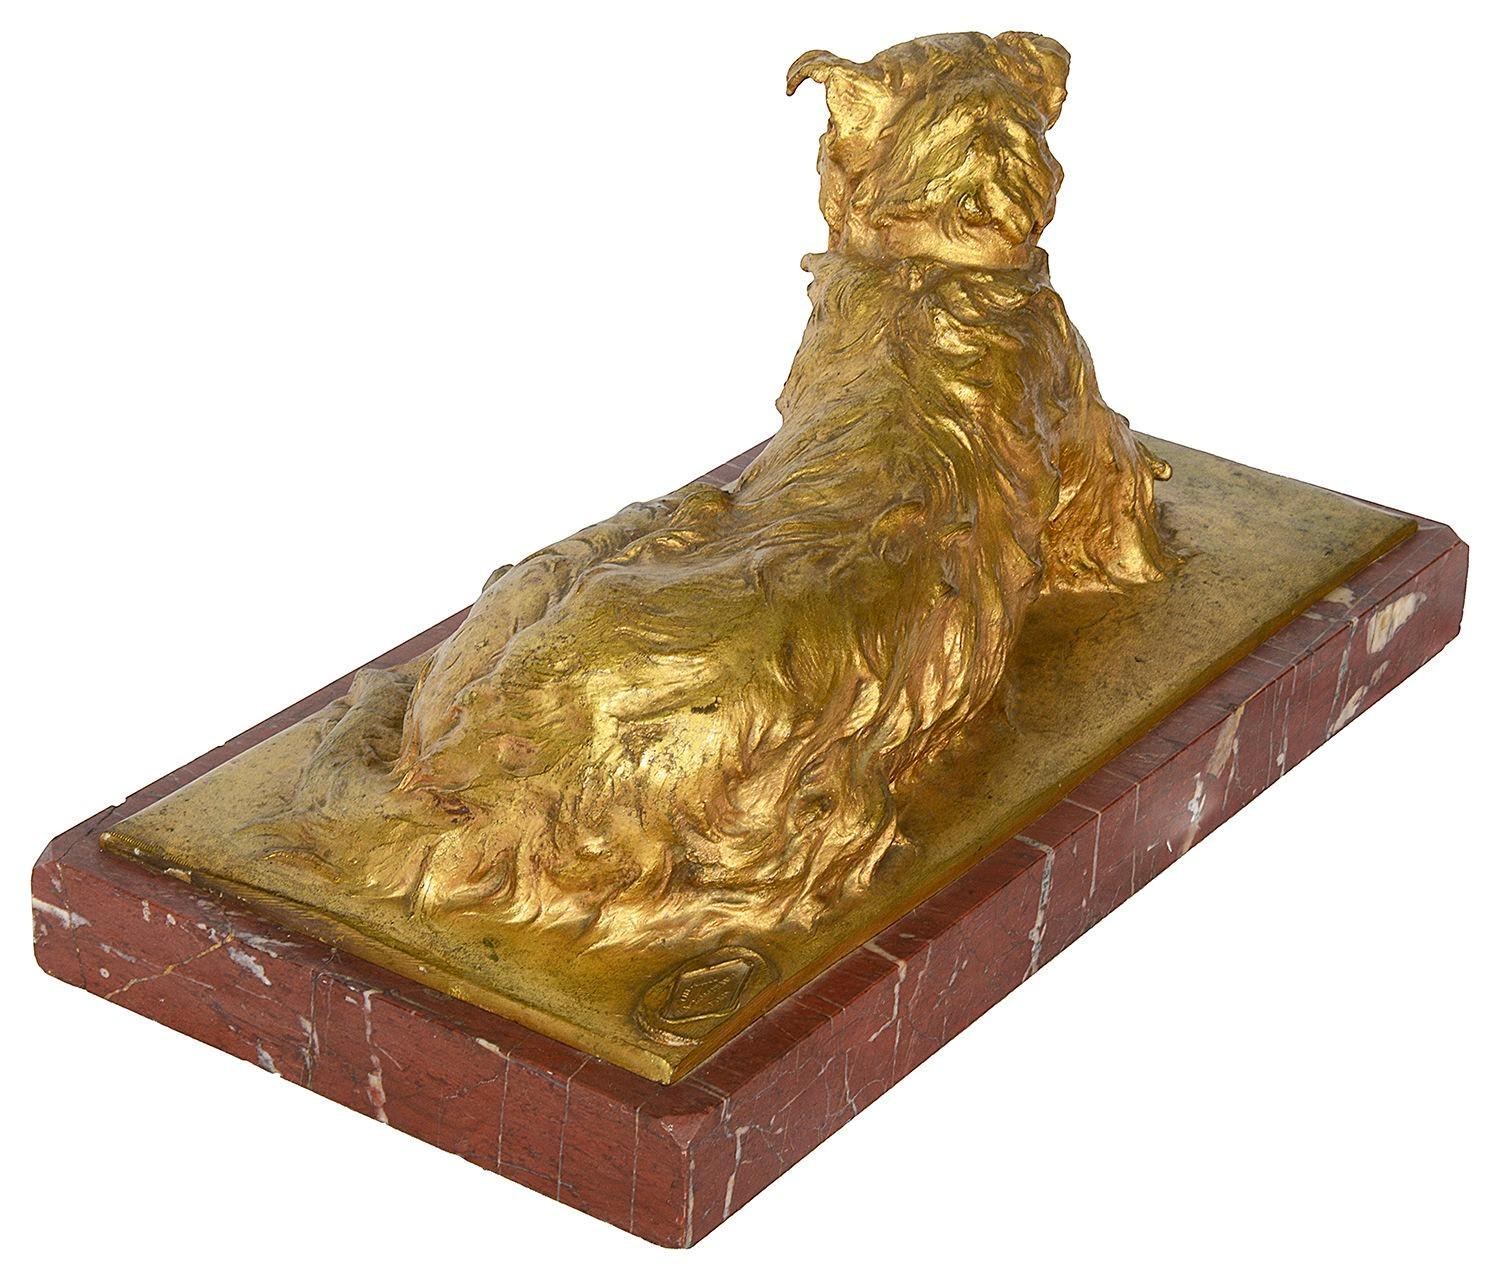 Gilt 19th Century gilded bronze sculpture of 'Two friends' signed Charles Paillet.